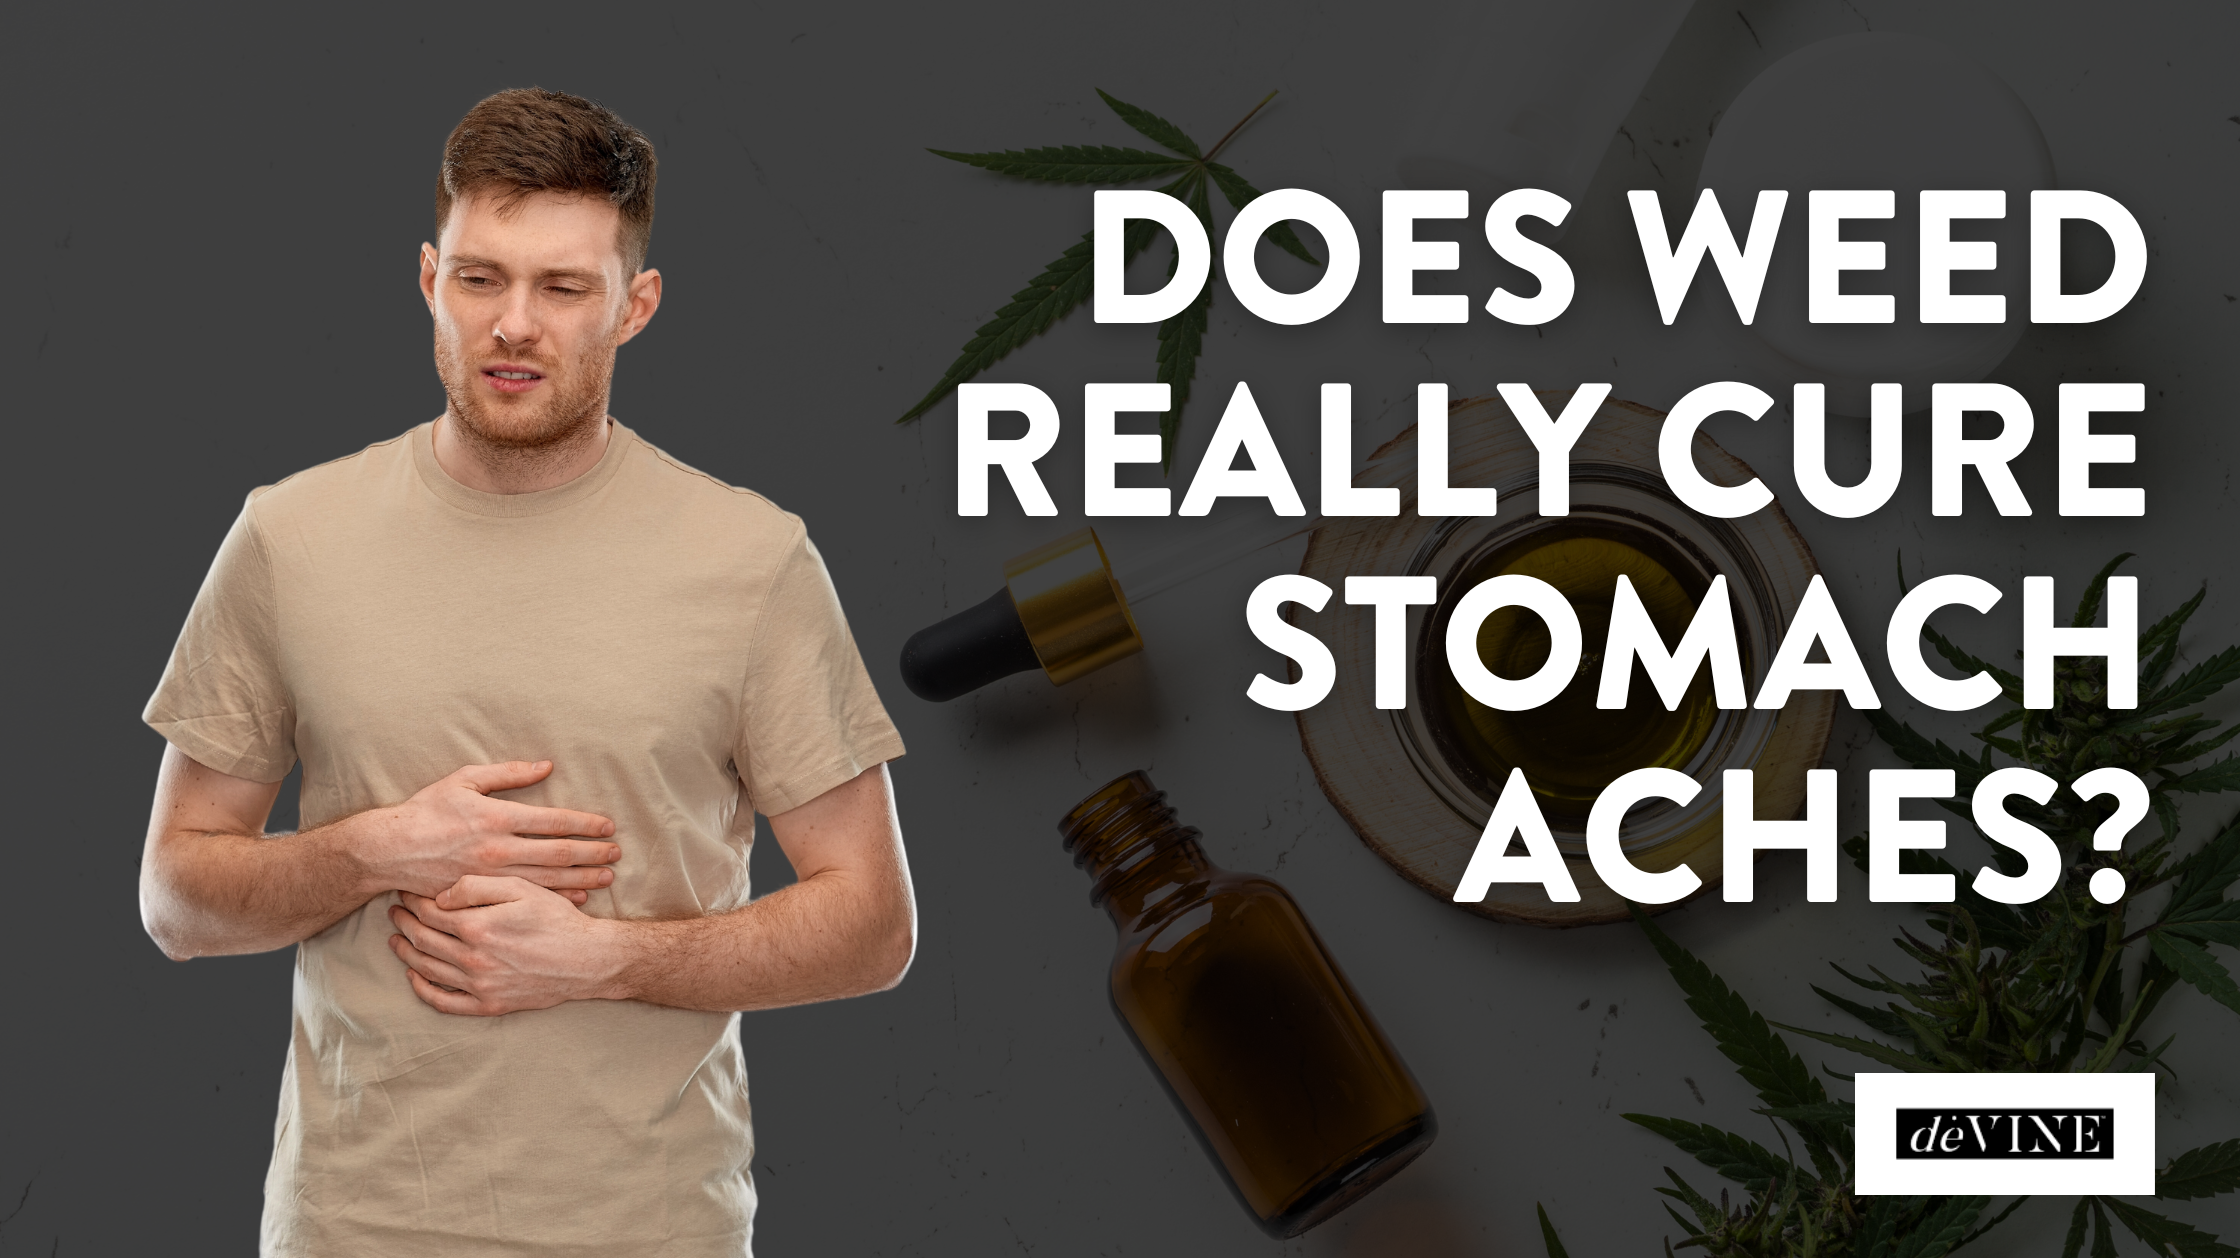 Shocking Revelation: Does Weed REALLY Cure Stomach Aches?